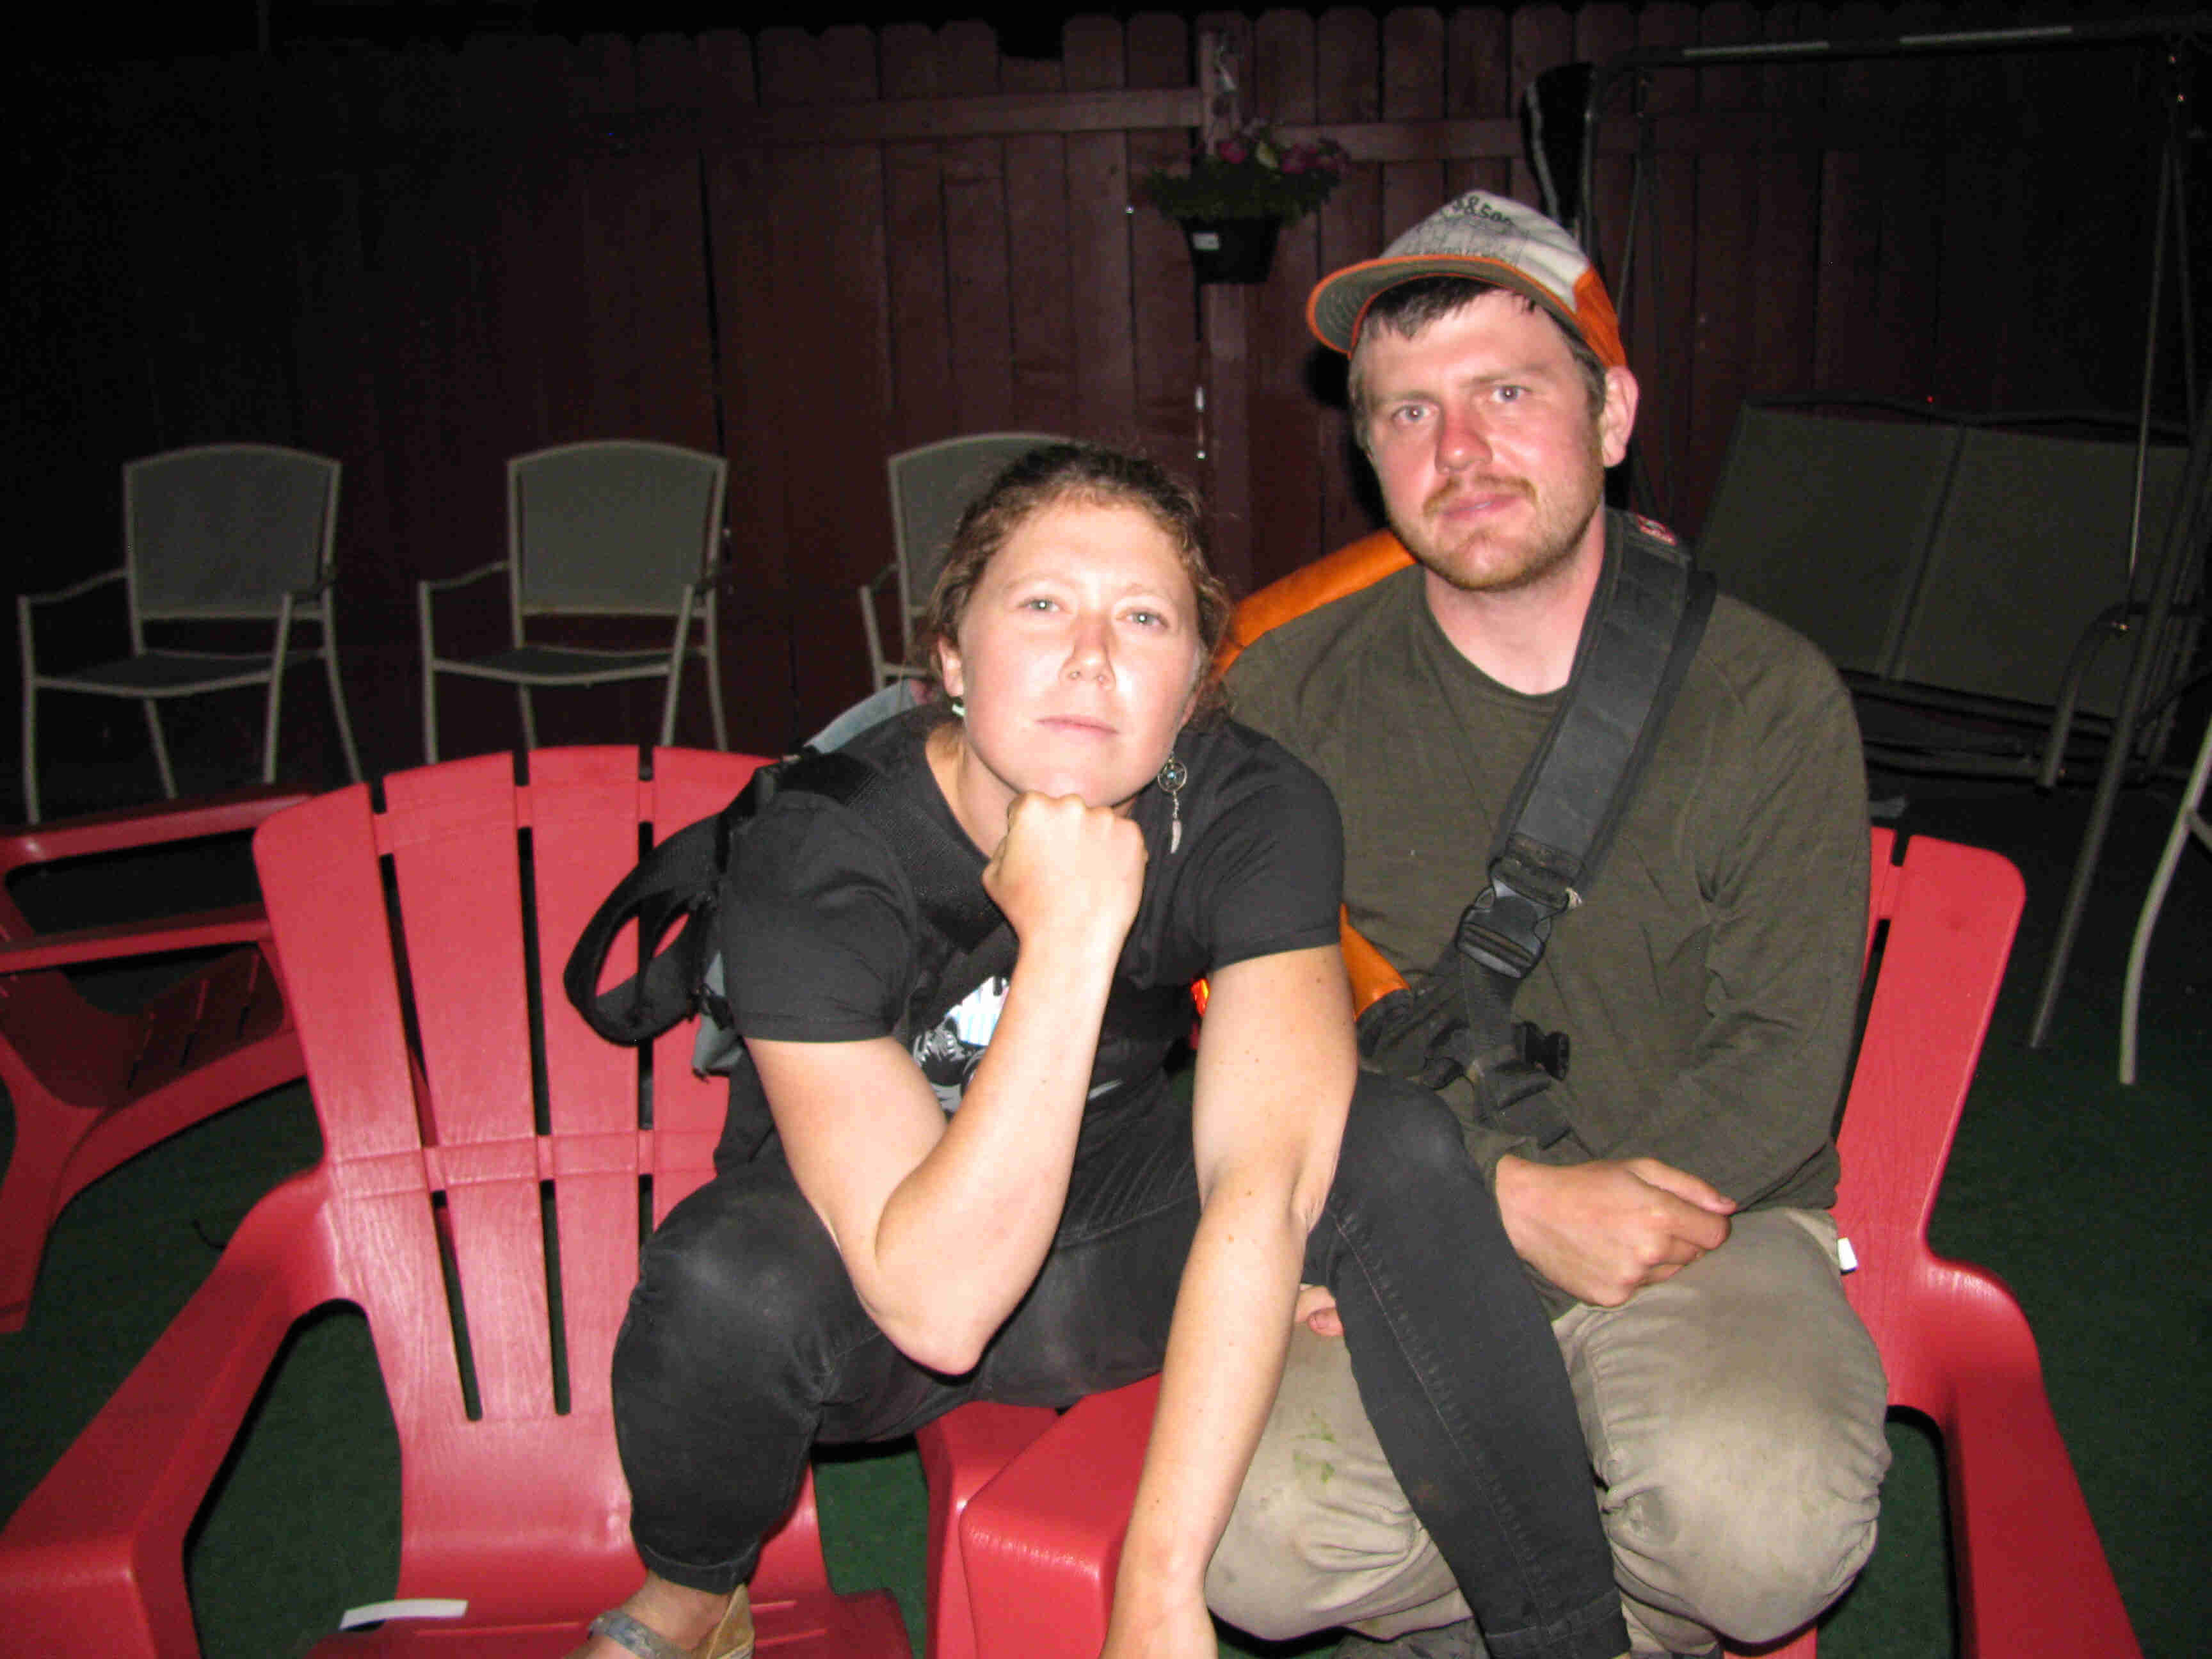 Front view of 2 people sitting on red, plastic chairs, posing together, inside a room with chairs lined up behind them